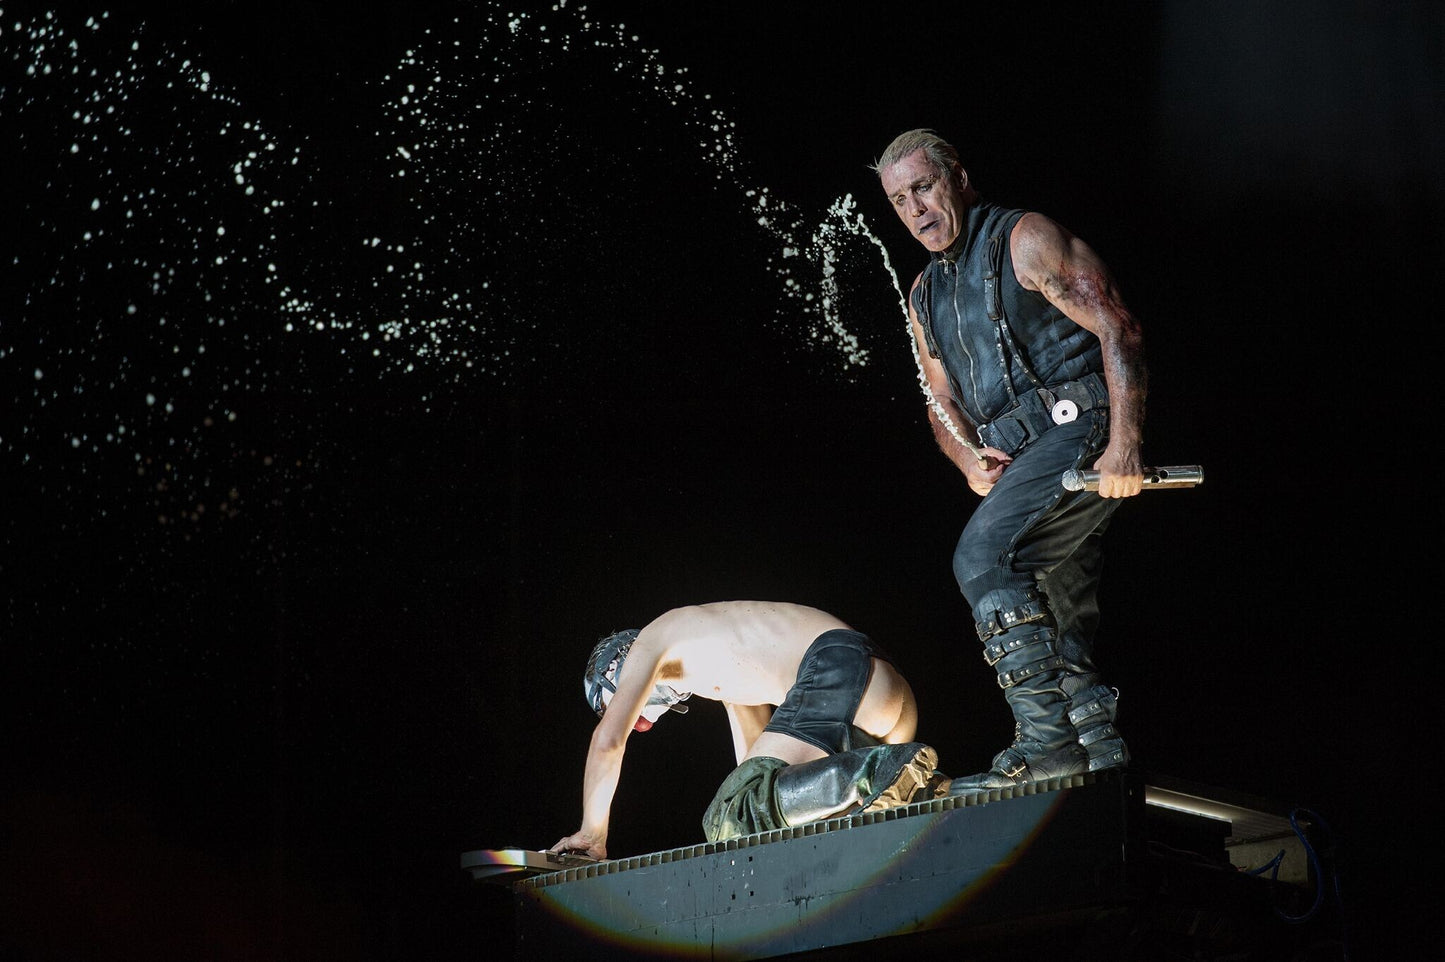 Rammstein - Till Lindemann and Christian 'Flake' Lorenz Get Freaky on Stage Rome Italy 2013 Poster 3